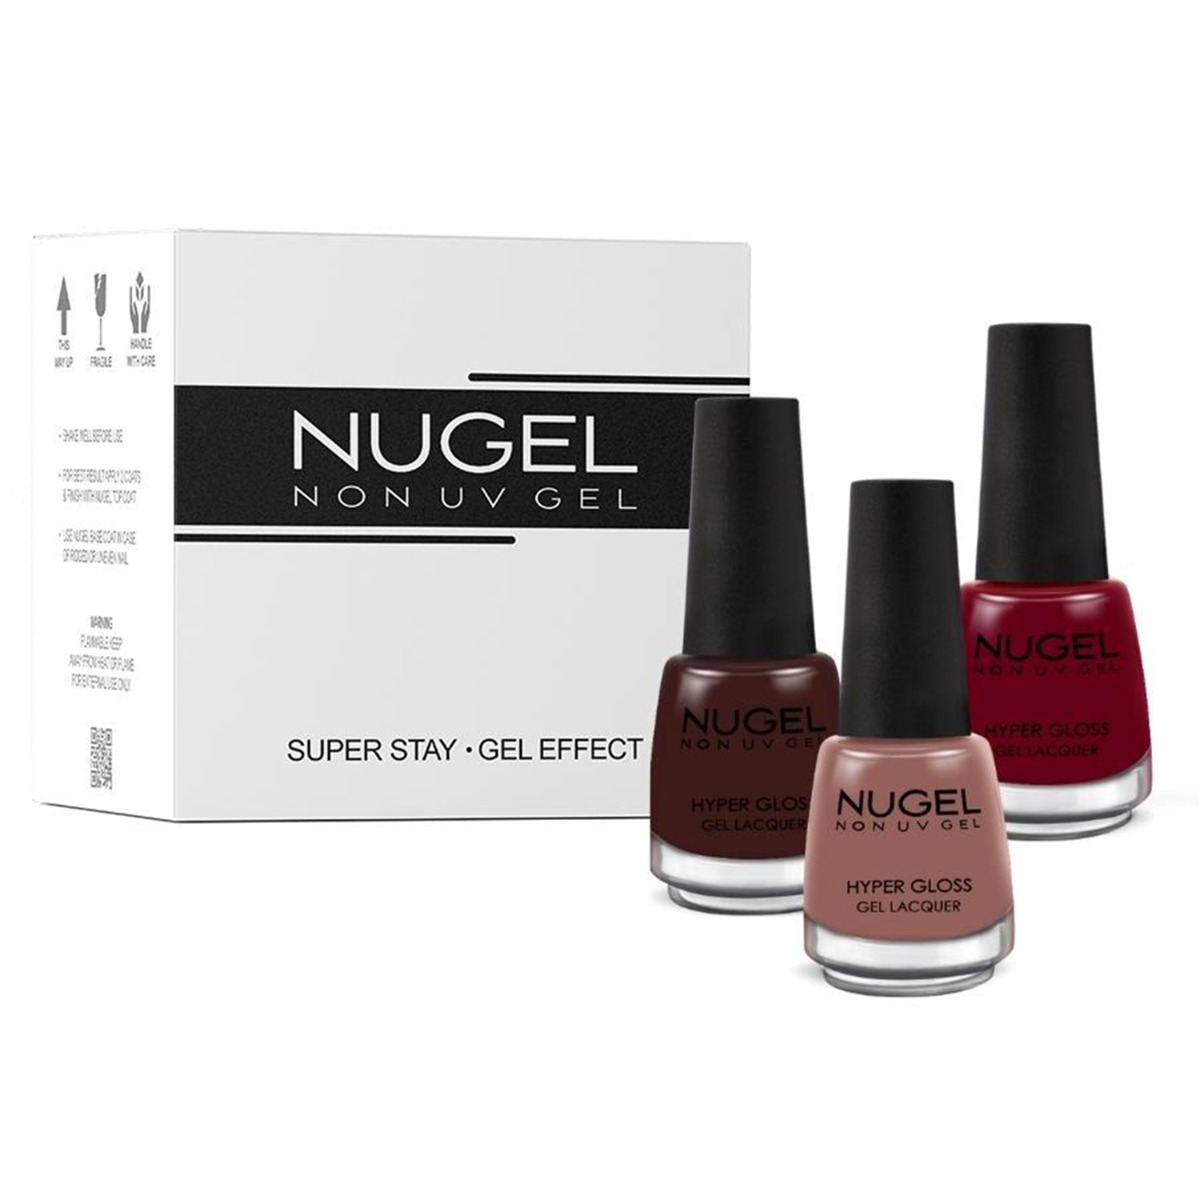 NUGEL 3 In 1 Combo 18 Quick Dry Gel Finish Nail Paint - Cake Collection, Nail Kit, 39ml